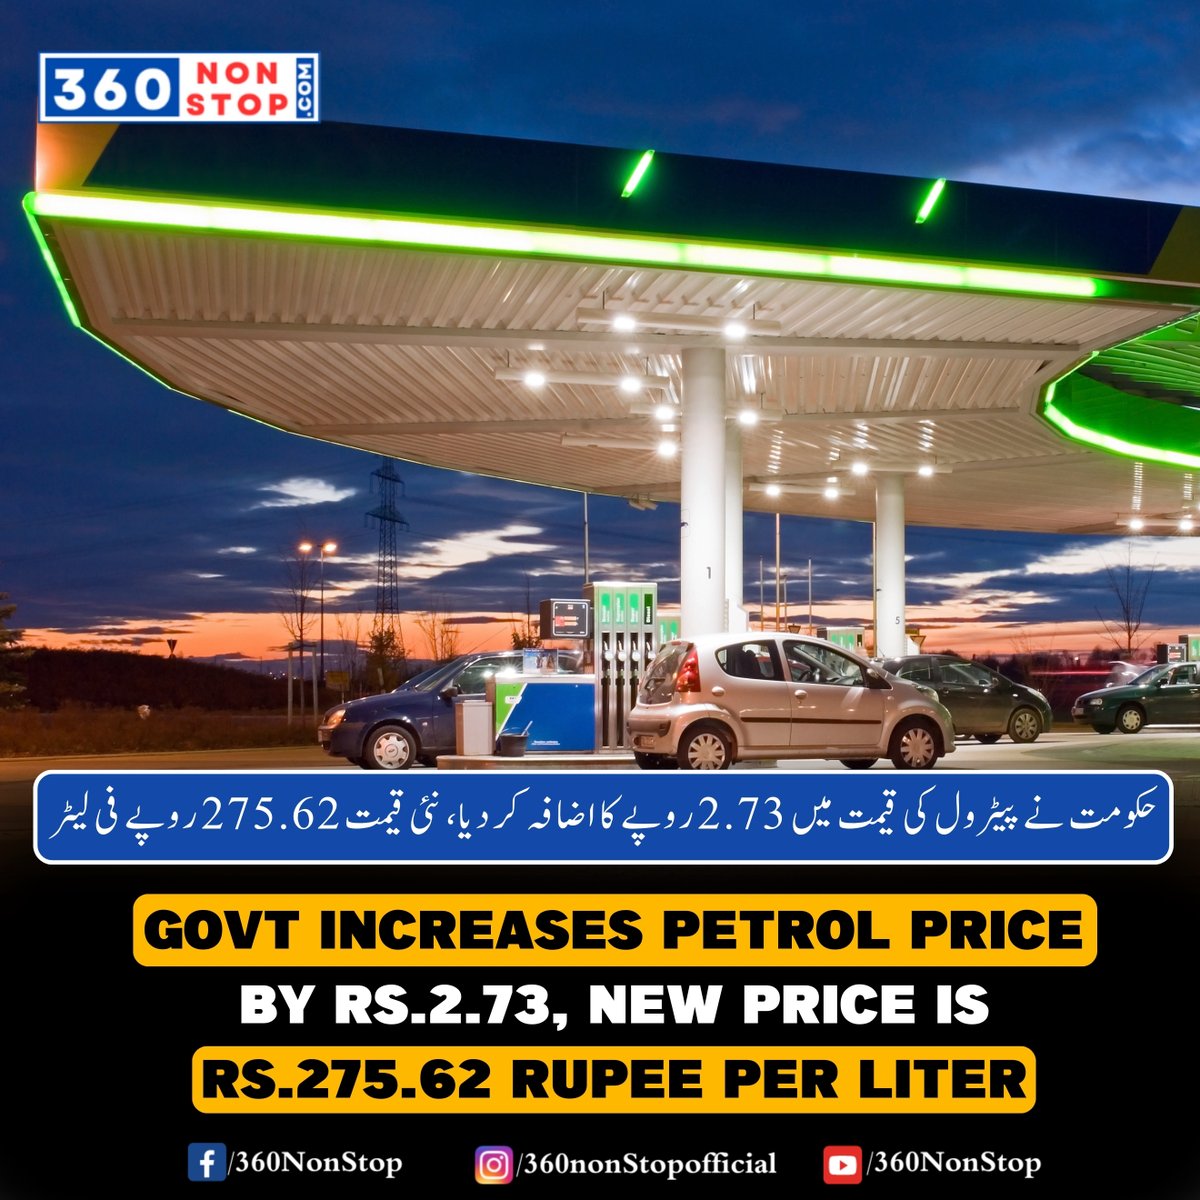 🚗 Fuel Price Update: حکومت نے پیٹرول کی قیمت میں 2.73 روپے کا اضافہ کر دیا، نئی قیمت 275.62 روپے فی لیٹر۔ 📈🚗 📱 Follow us on Instagram: [shorturl.at/zKORU] 🌐 Join Our Facebook Group: [shorturl.at/mqy14] #FuelPriceUpdate #PetrolPriceHike #Government #360NonStop